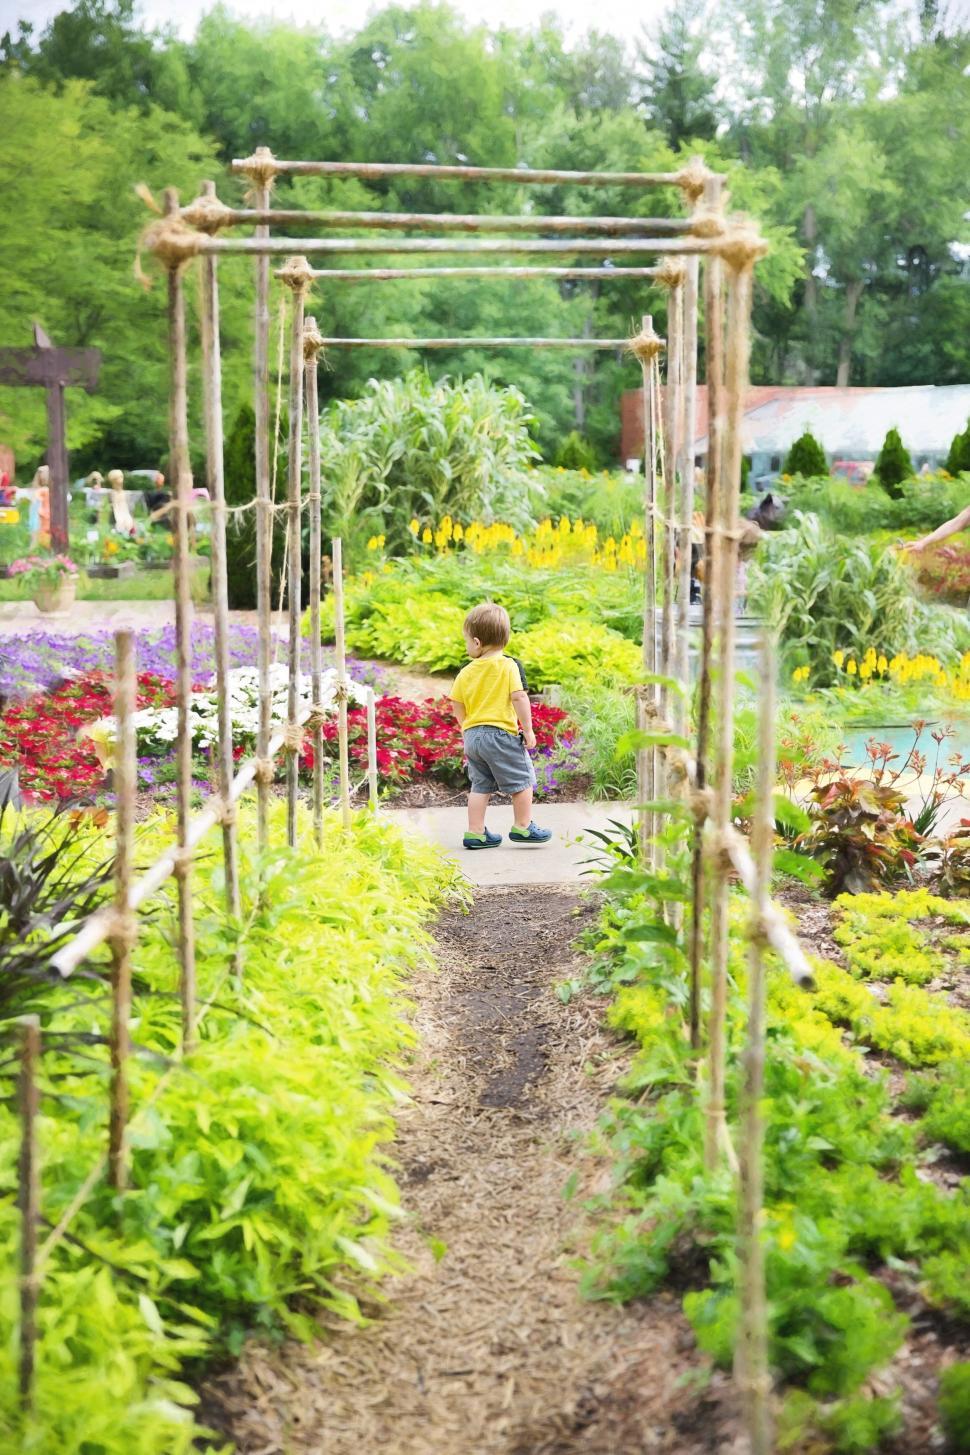 Free Image of Flower Garden and Little Child  